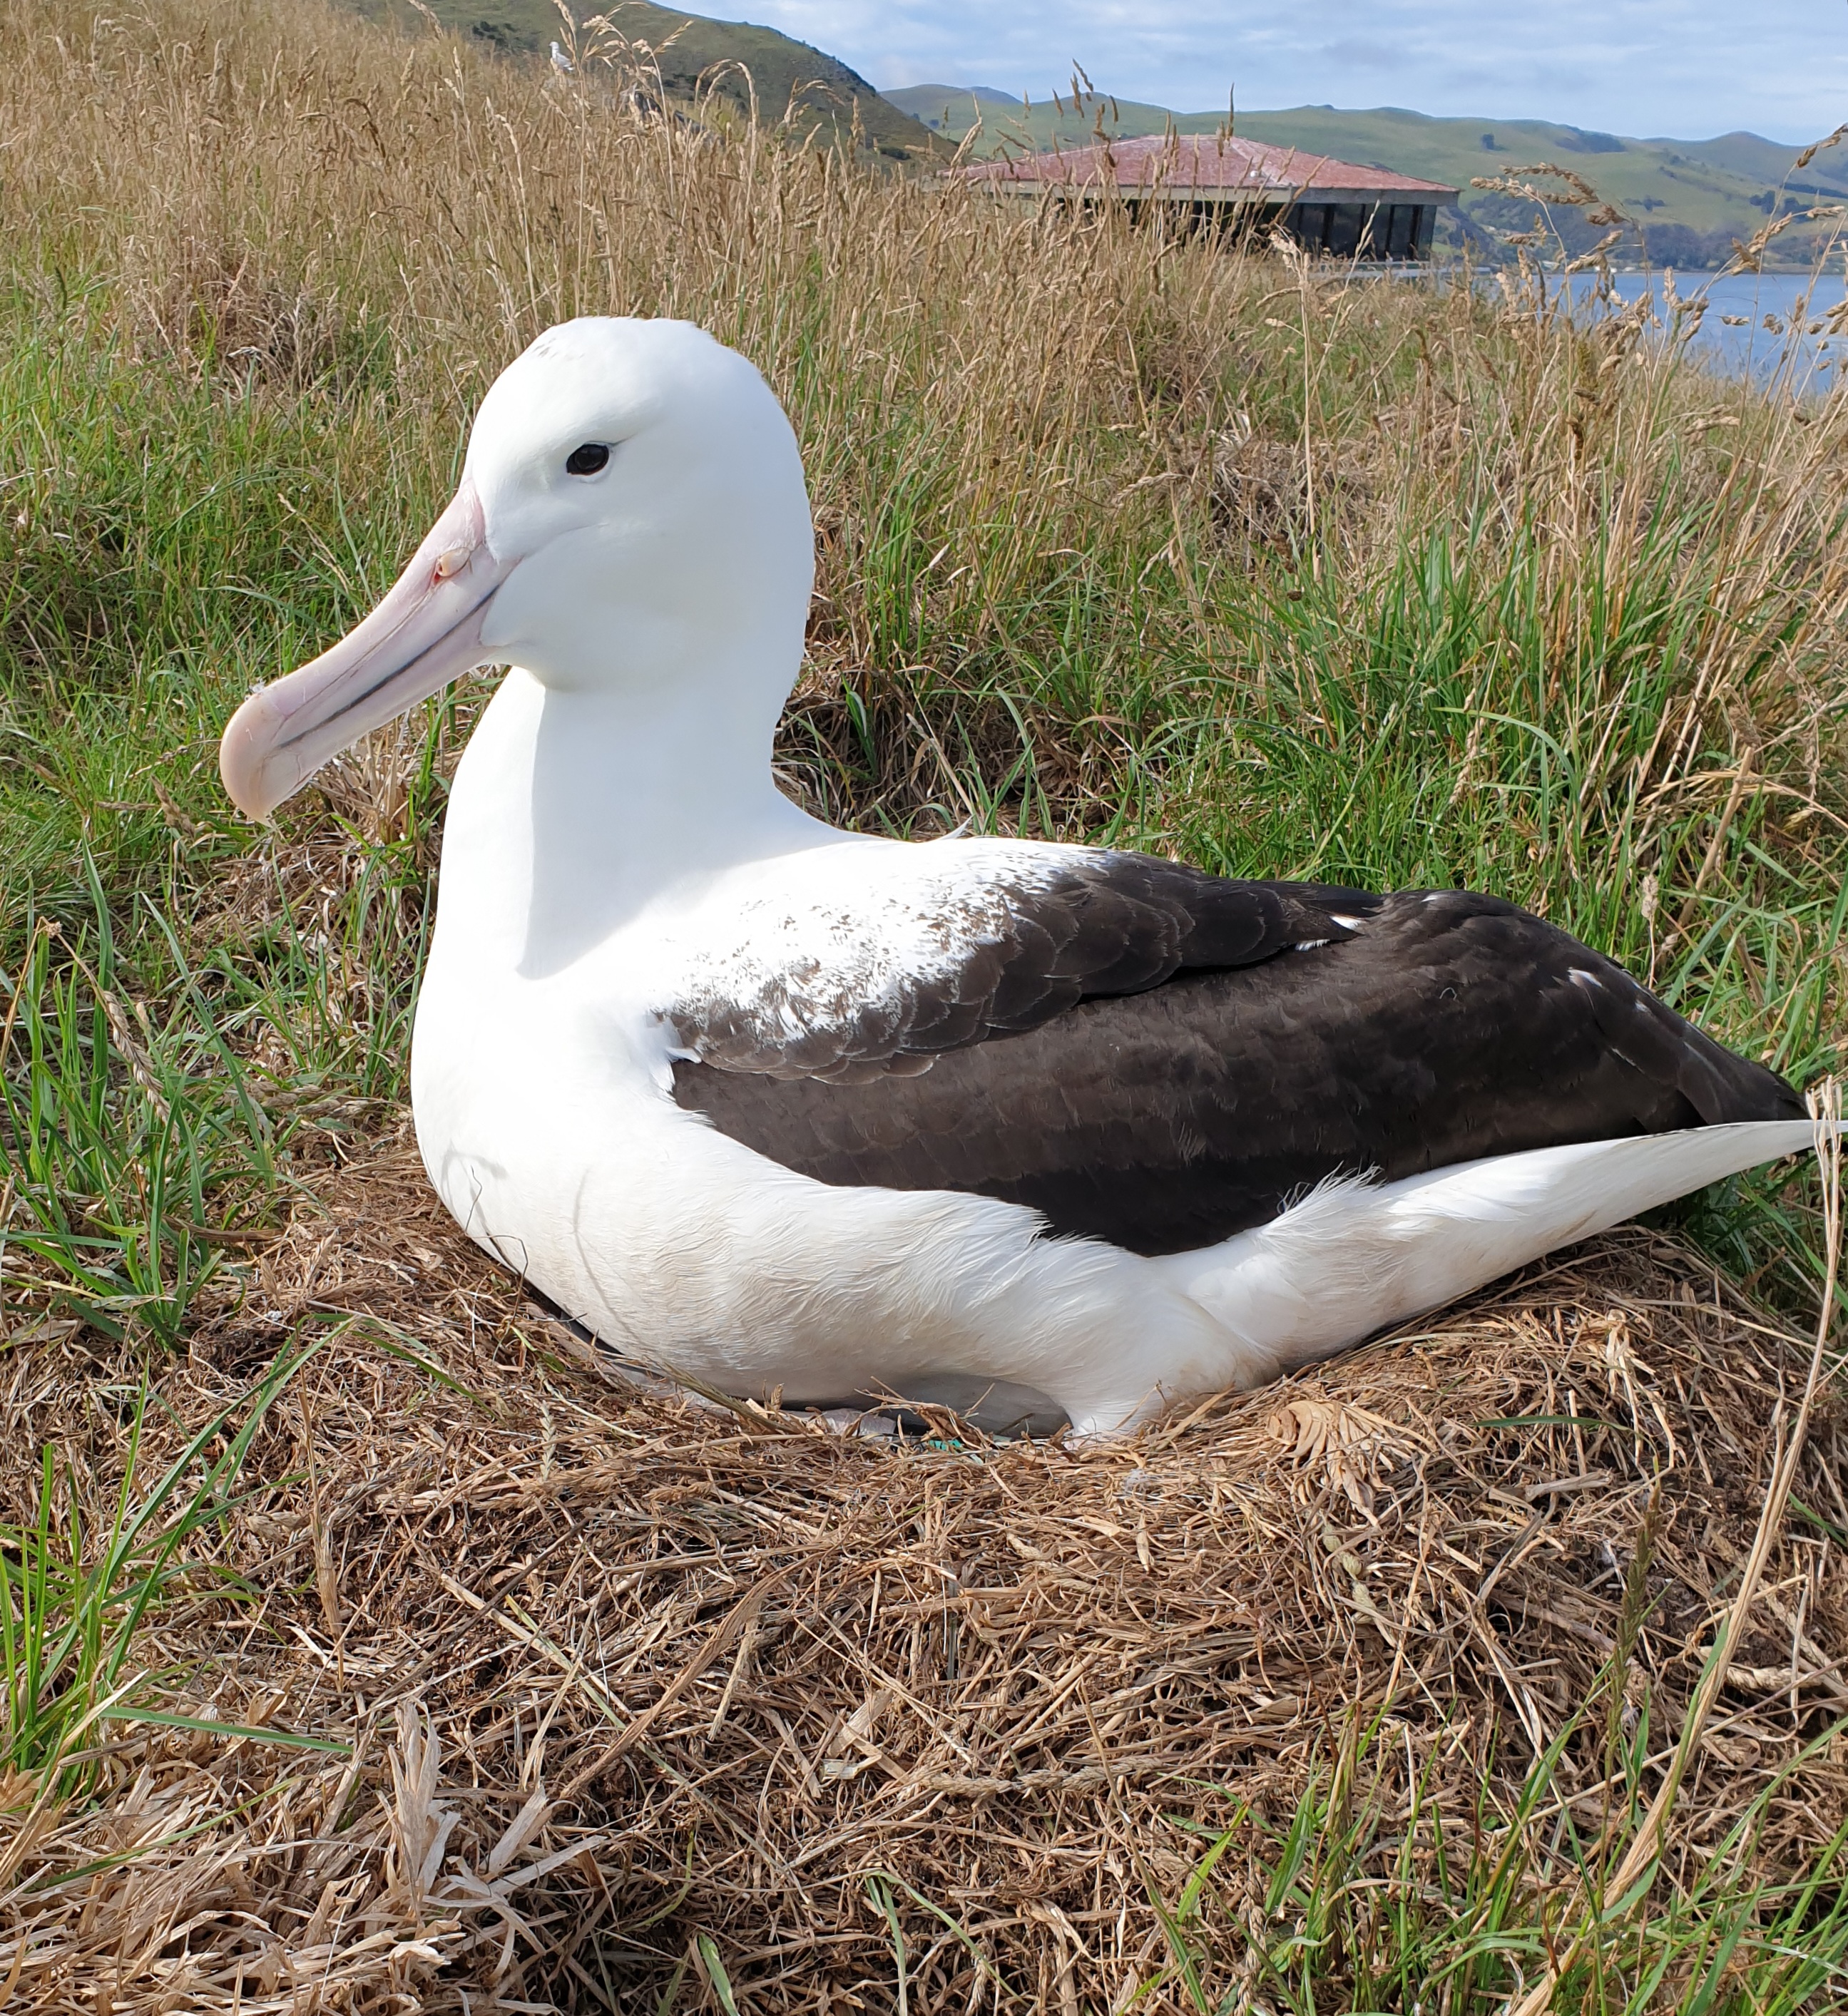 The Richdale Observatory overlooks part of the albatross colony